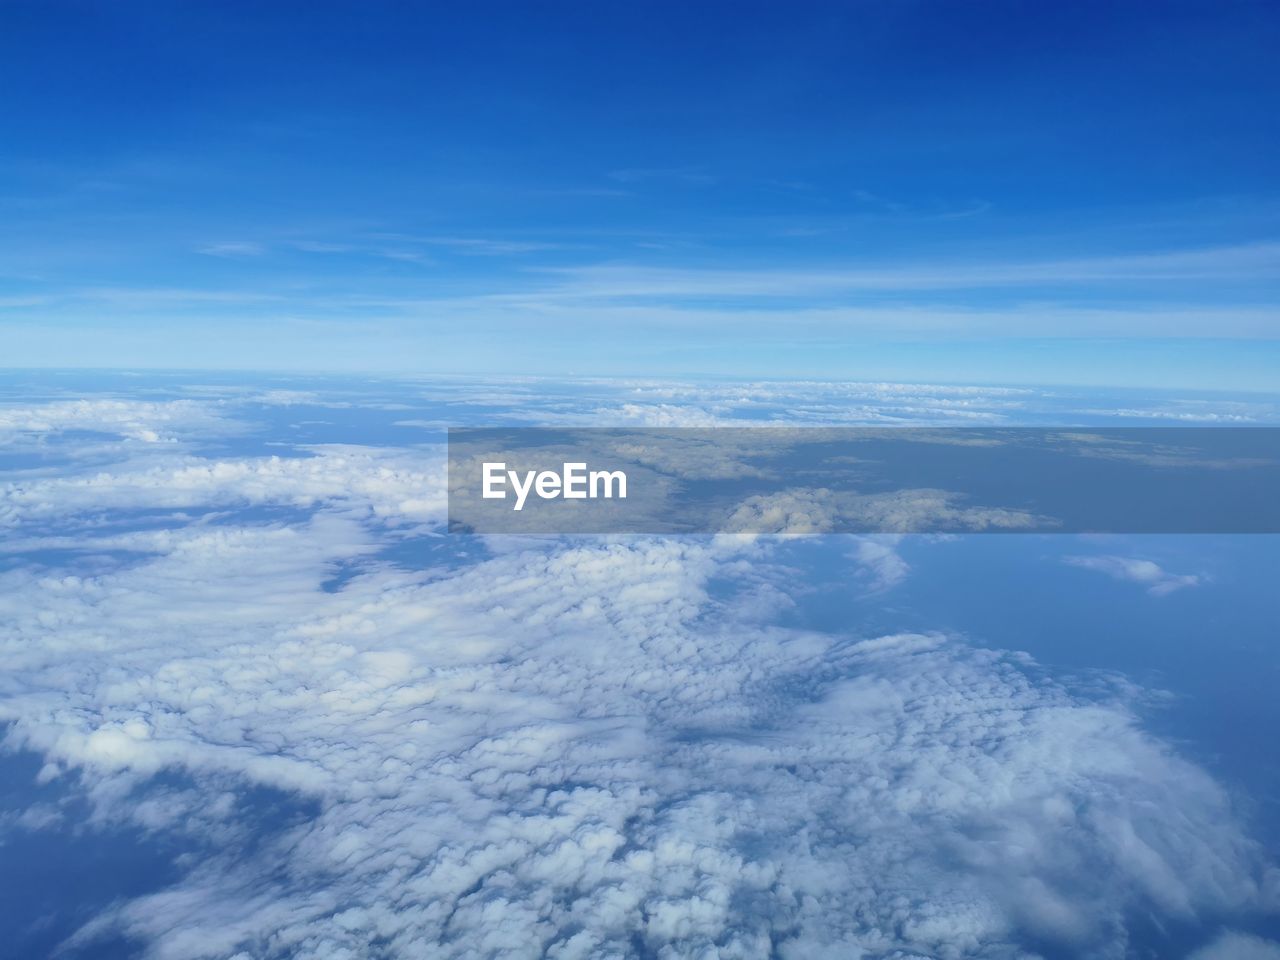 sky, cloud, aerial view, horizon, environment, blue, scenics - nature, beauty in nature, nature, cloudscape, landscape, no people, high up, white, mountain range, atmosphere, plain, tranquility, tranquil scene, idyllic, high angle view, airplane, outdoors, day, copy space, backgrounds, aerial photography, travel, fluffy, mountain, air vehicle, flying, planet earth, sunlight, urban skyline, space, above, cold temperature, winter